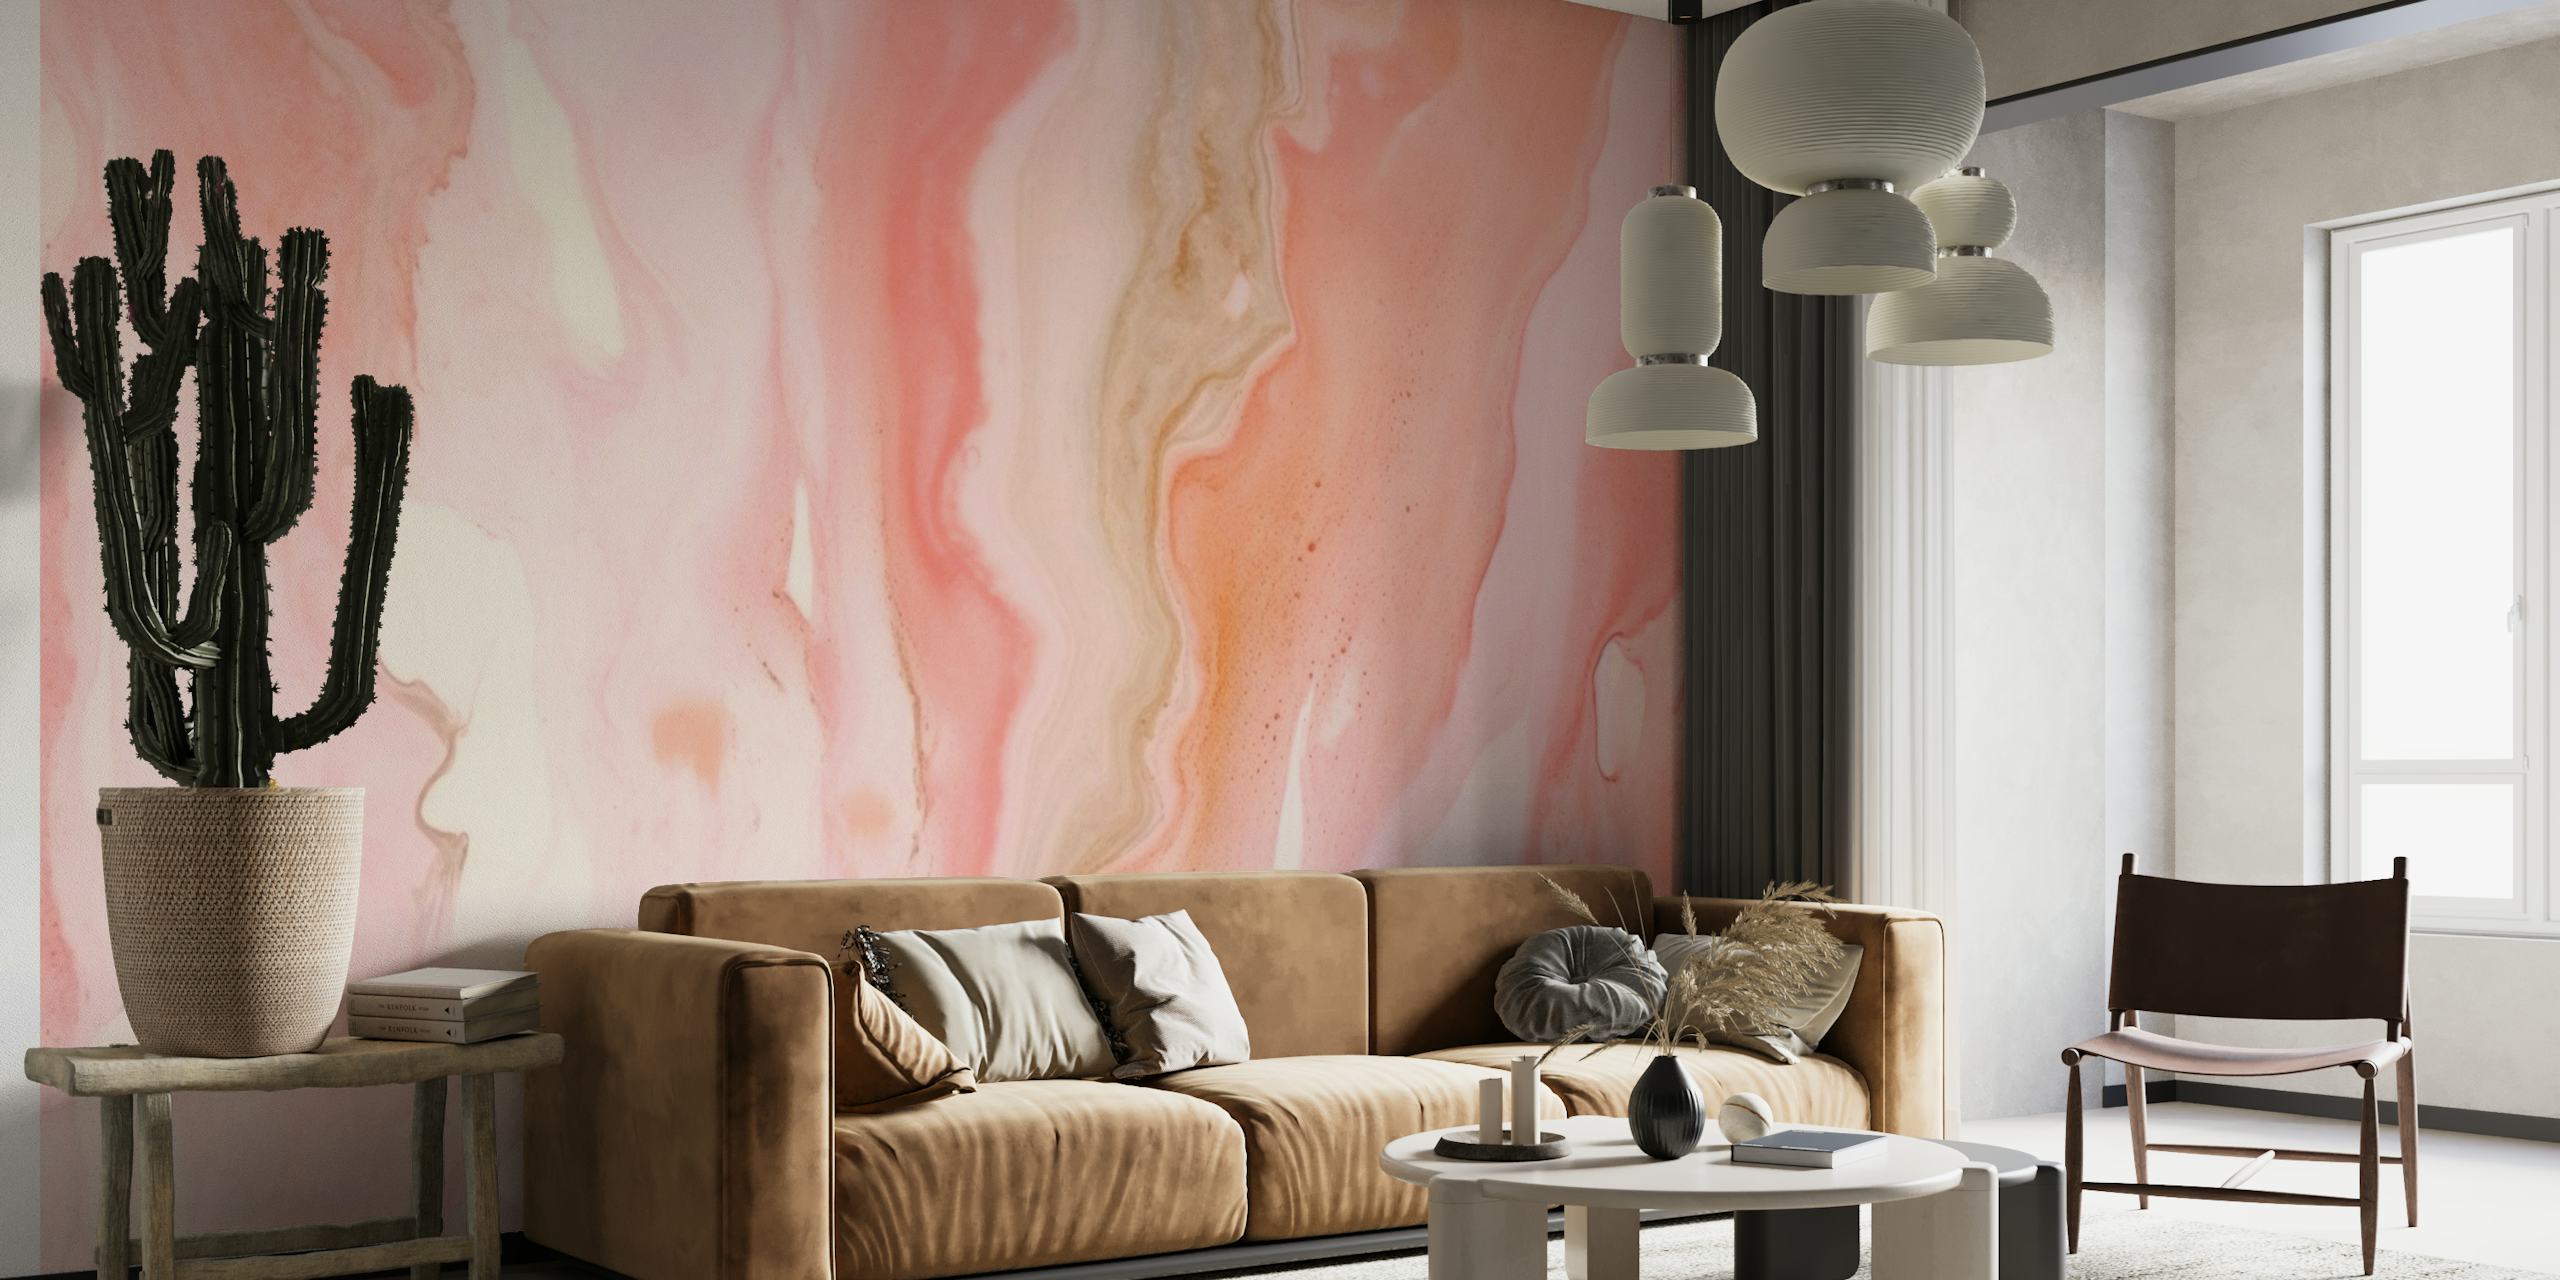 Luxury Marble Blush Pink wall mural featuring elegant swirls and shades of pink and white